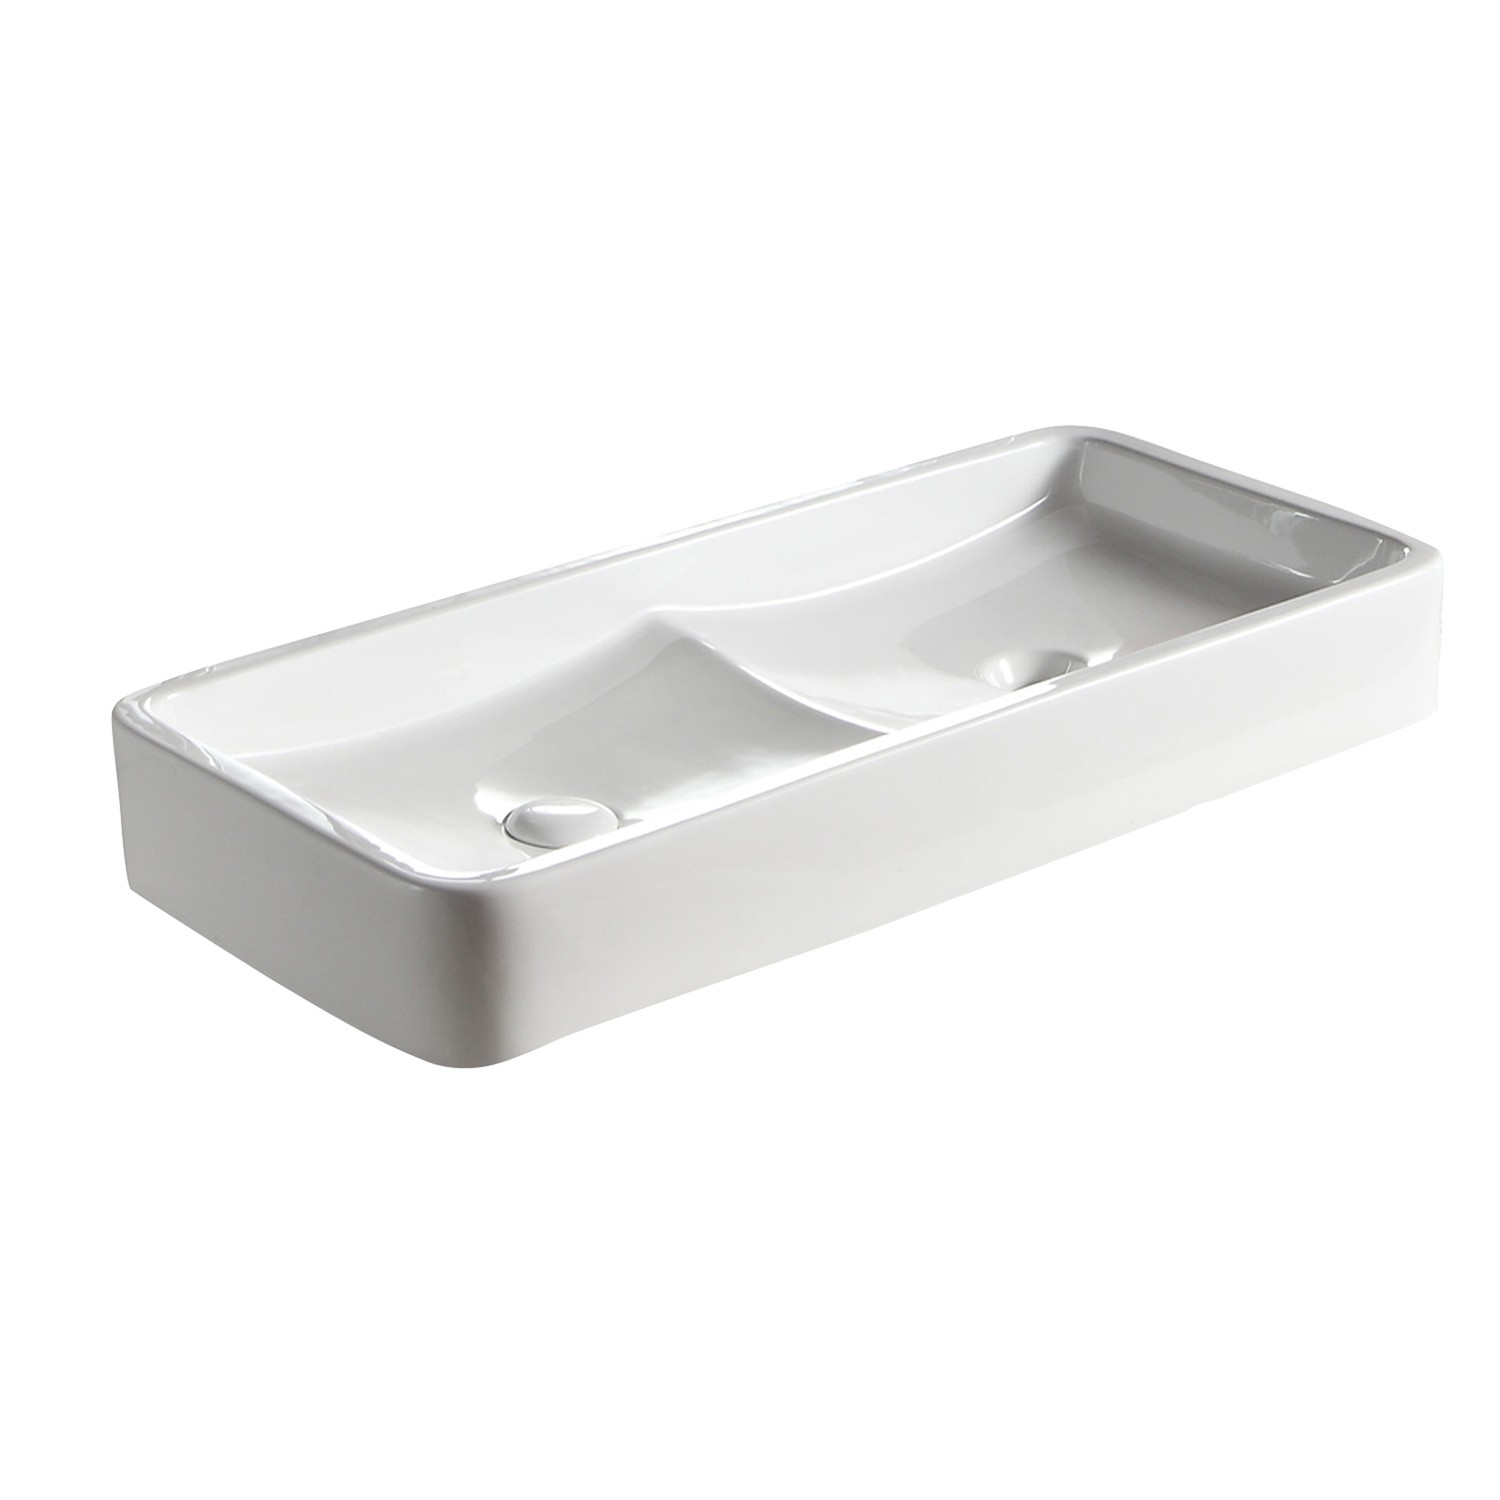 BARCLAY 4-8100WH ROSALIE 31 1/2 INCH DOUBLE BASIN ABOVE COUNTER BATHROOM SINK - WHITE